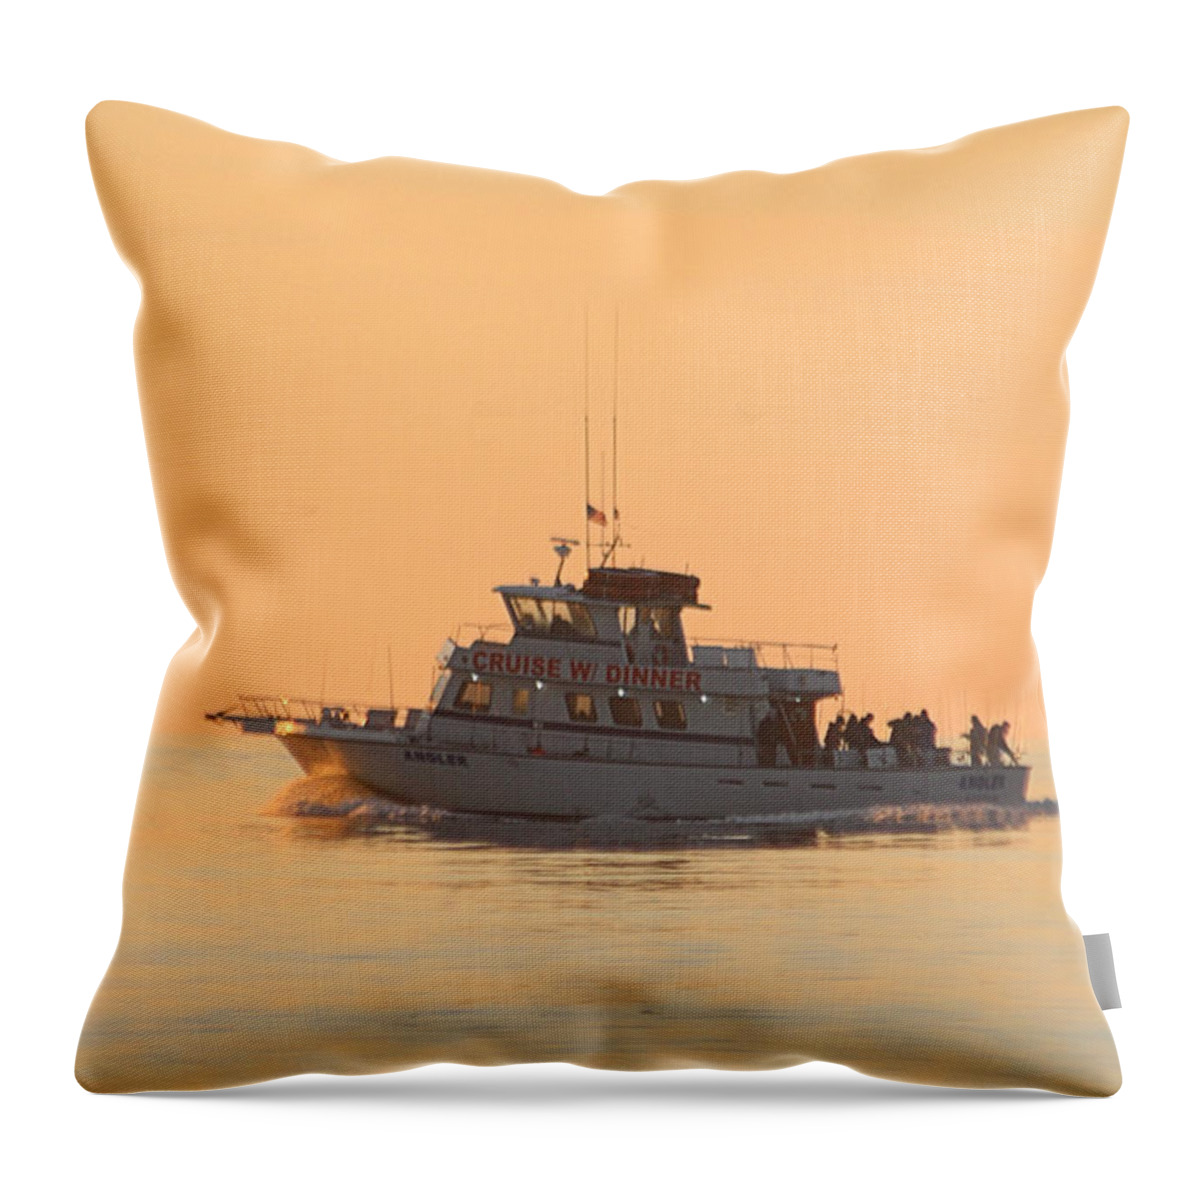 Angler Throw Pillow featuring the photograph Going Fishing On The Angler by Robert Banach